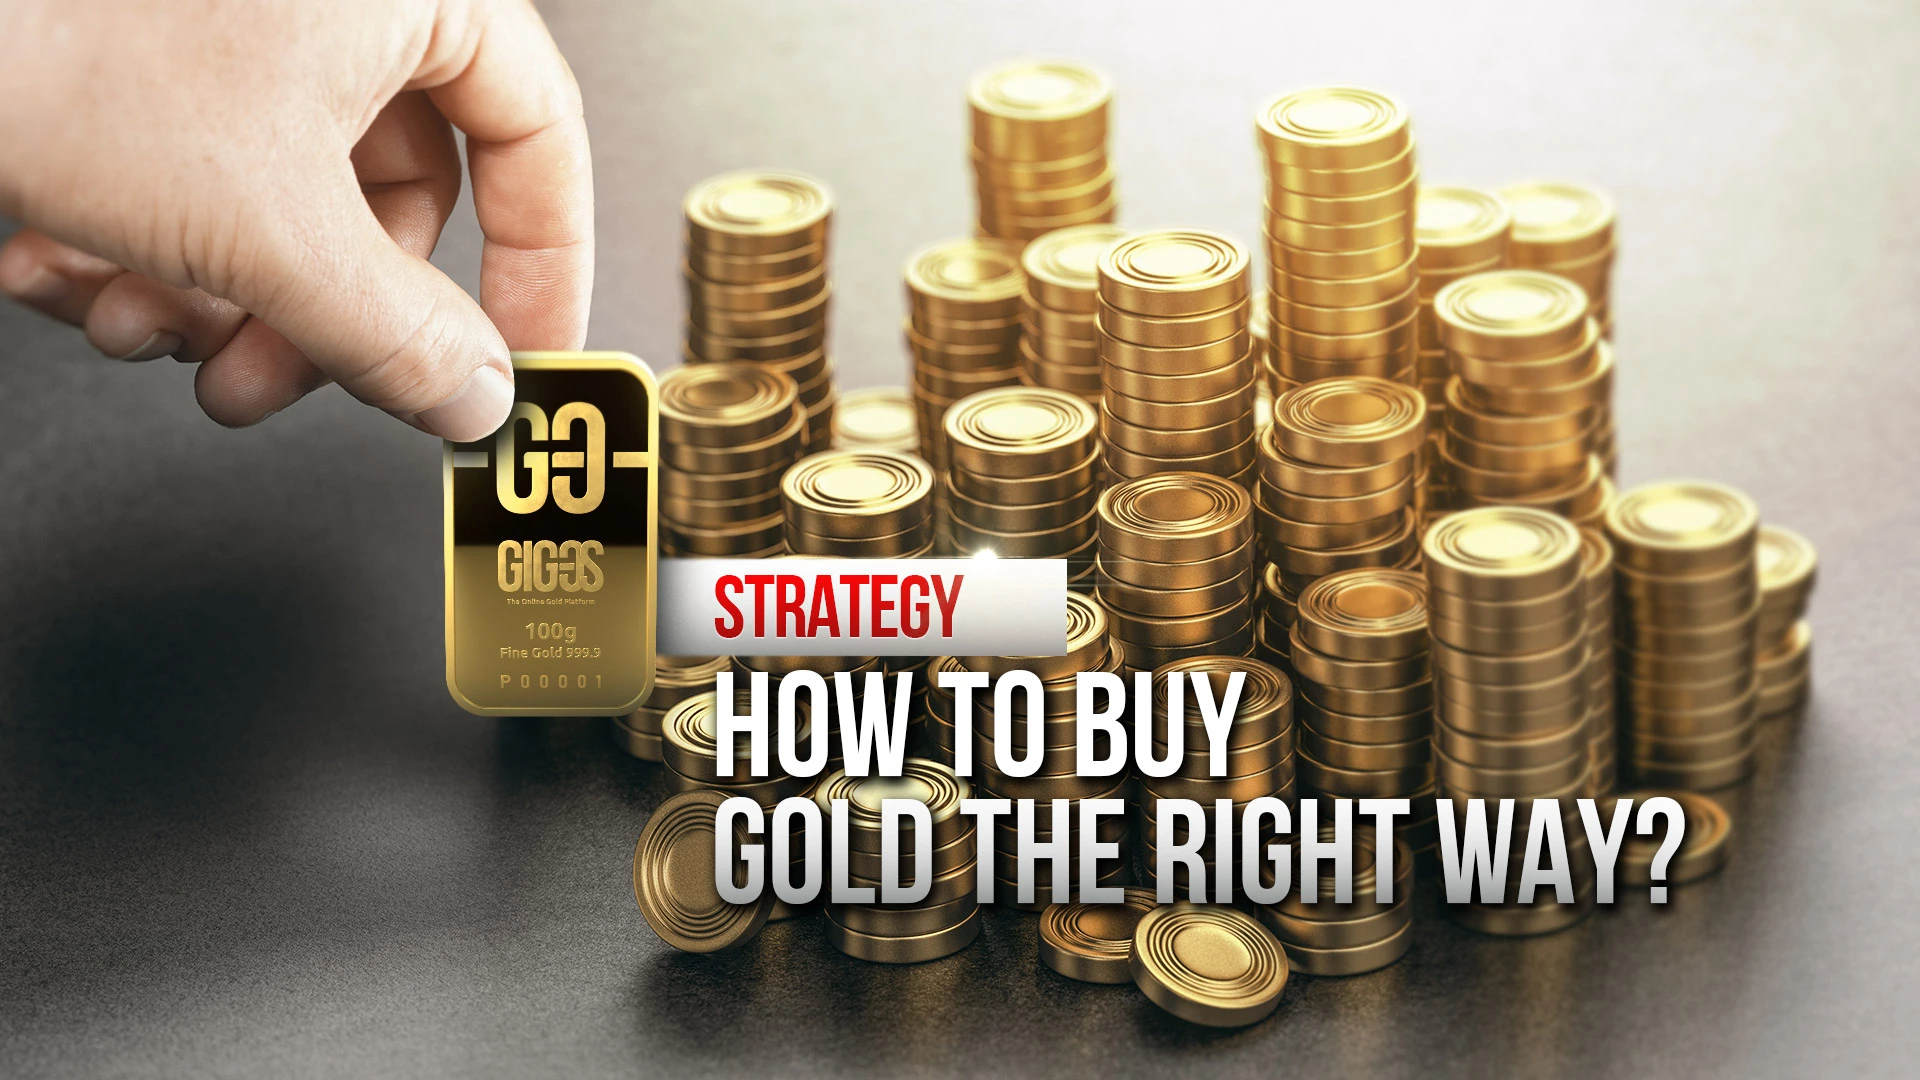 [VIDEO] Strategy: how to buy gold the right way?
